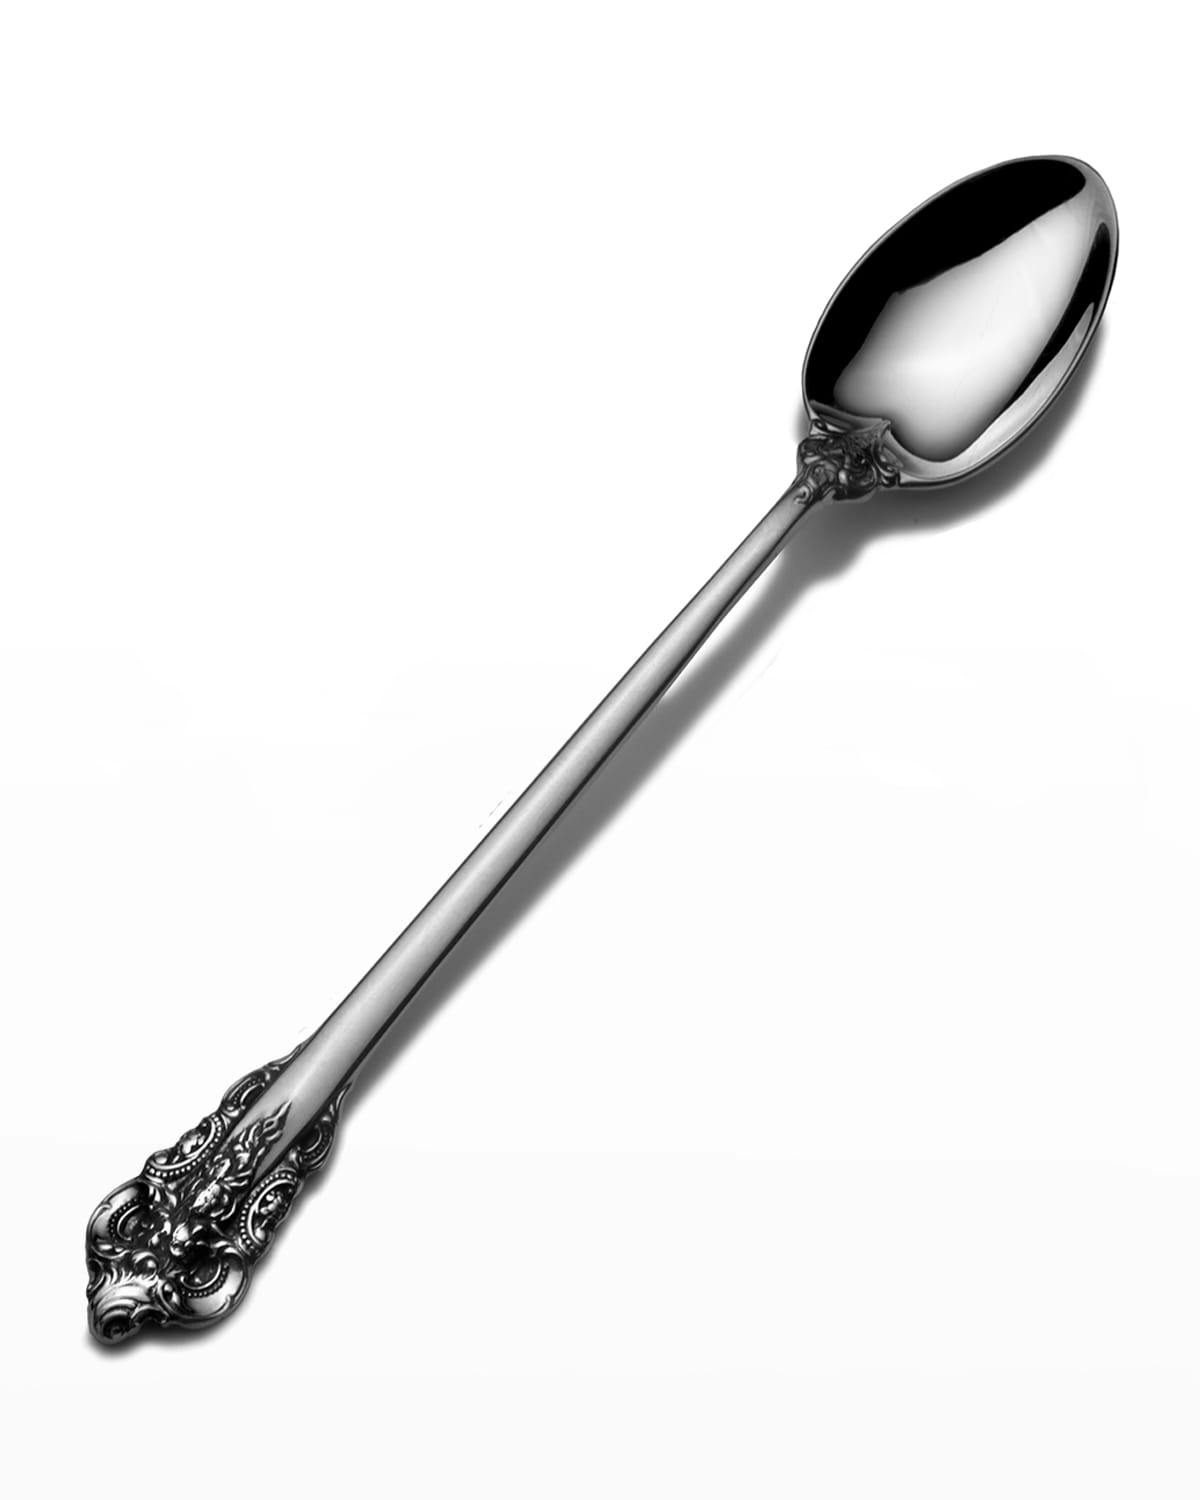 MONOGRAMMED Details about   WALLACE CONCORD STERLING SILVER 7 5/8" ICED TEASPOON 